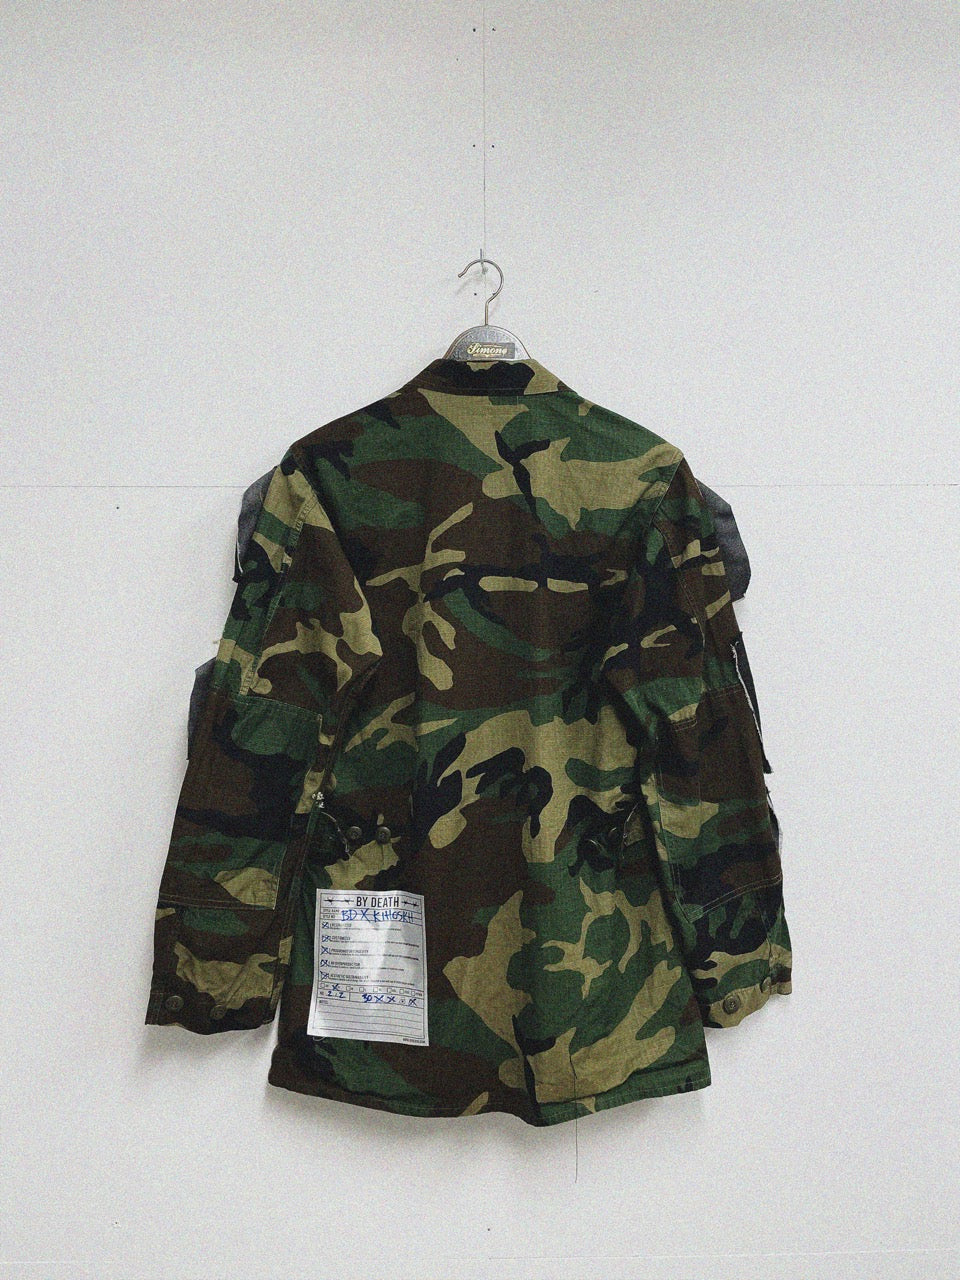 EMBROIDERED CAMO JACKET #2 by death